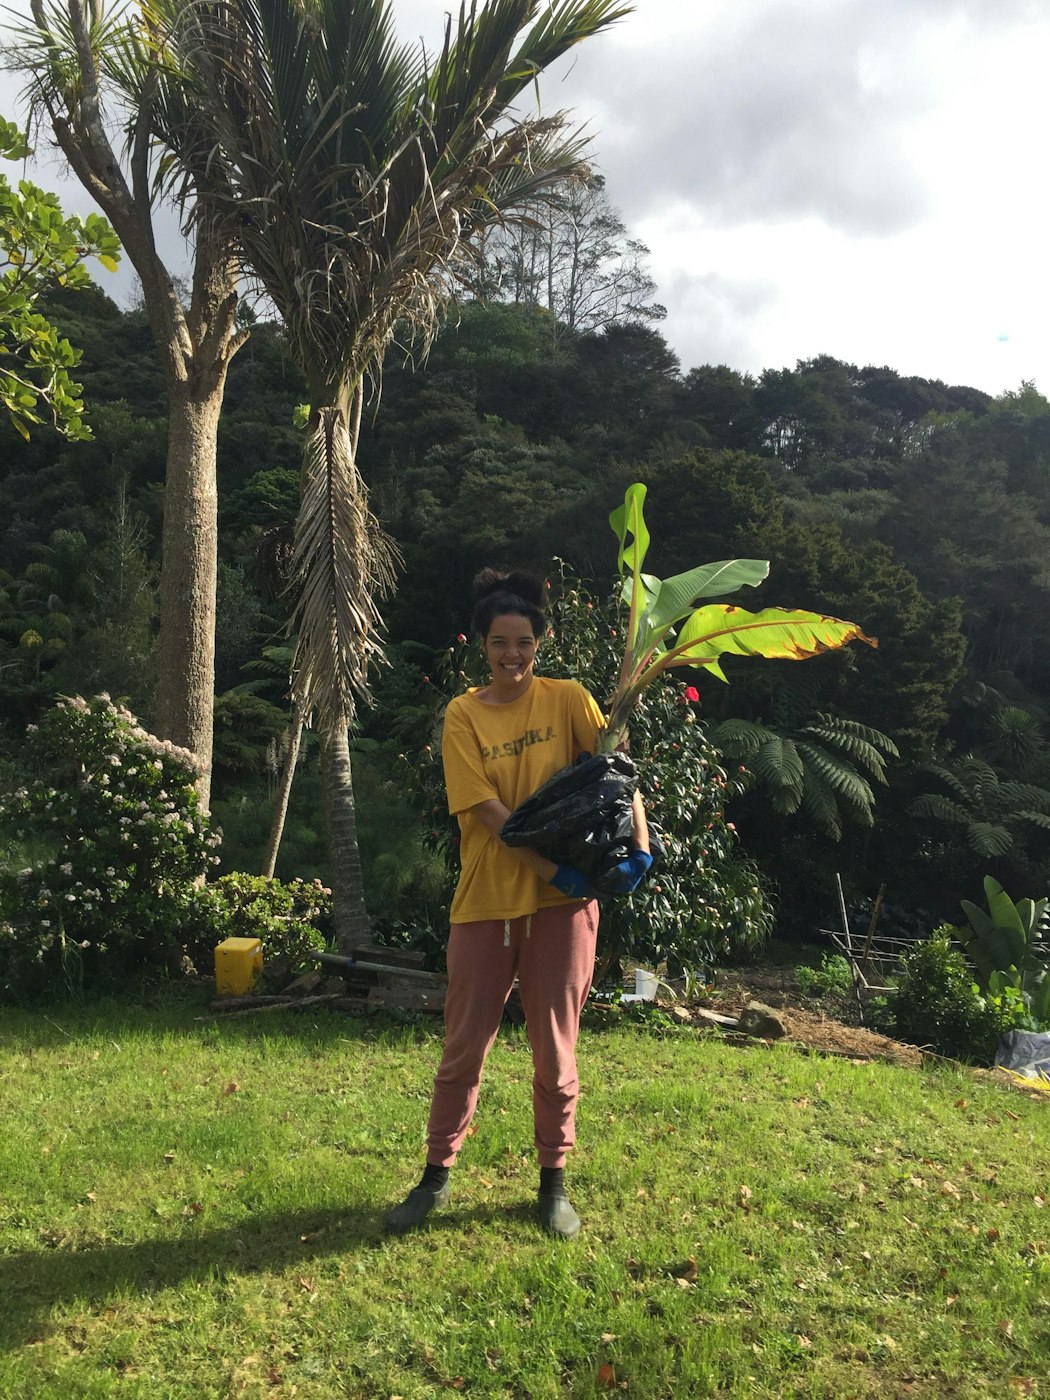 Ahilapalapa stands outside, holding a large plant with plastic over it’s roots, smiling. They are wearing a yellow t-shirt which reads “PASIFIKA”, red pants and gumboots.